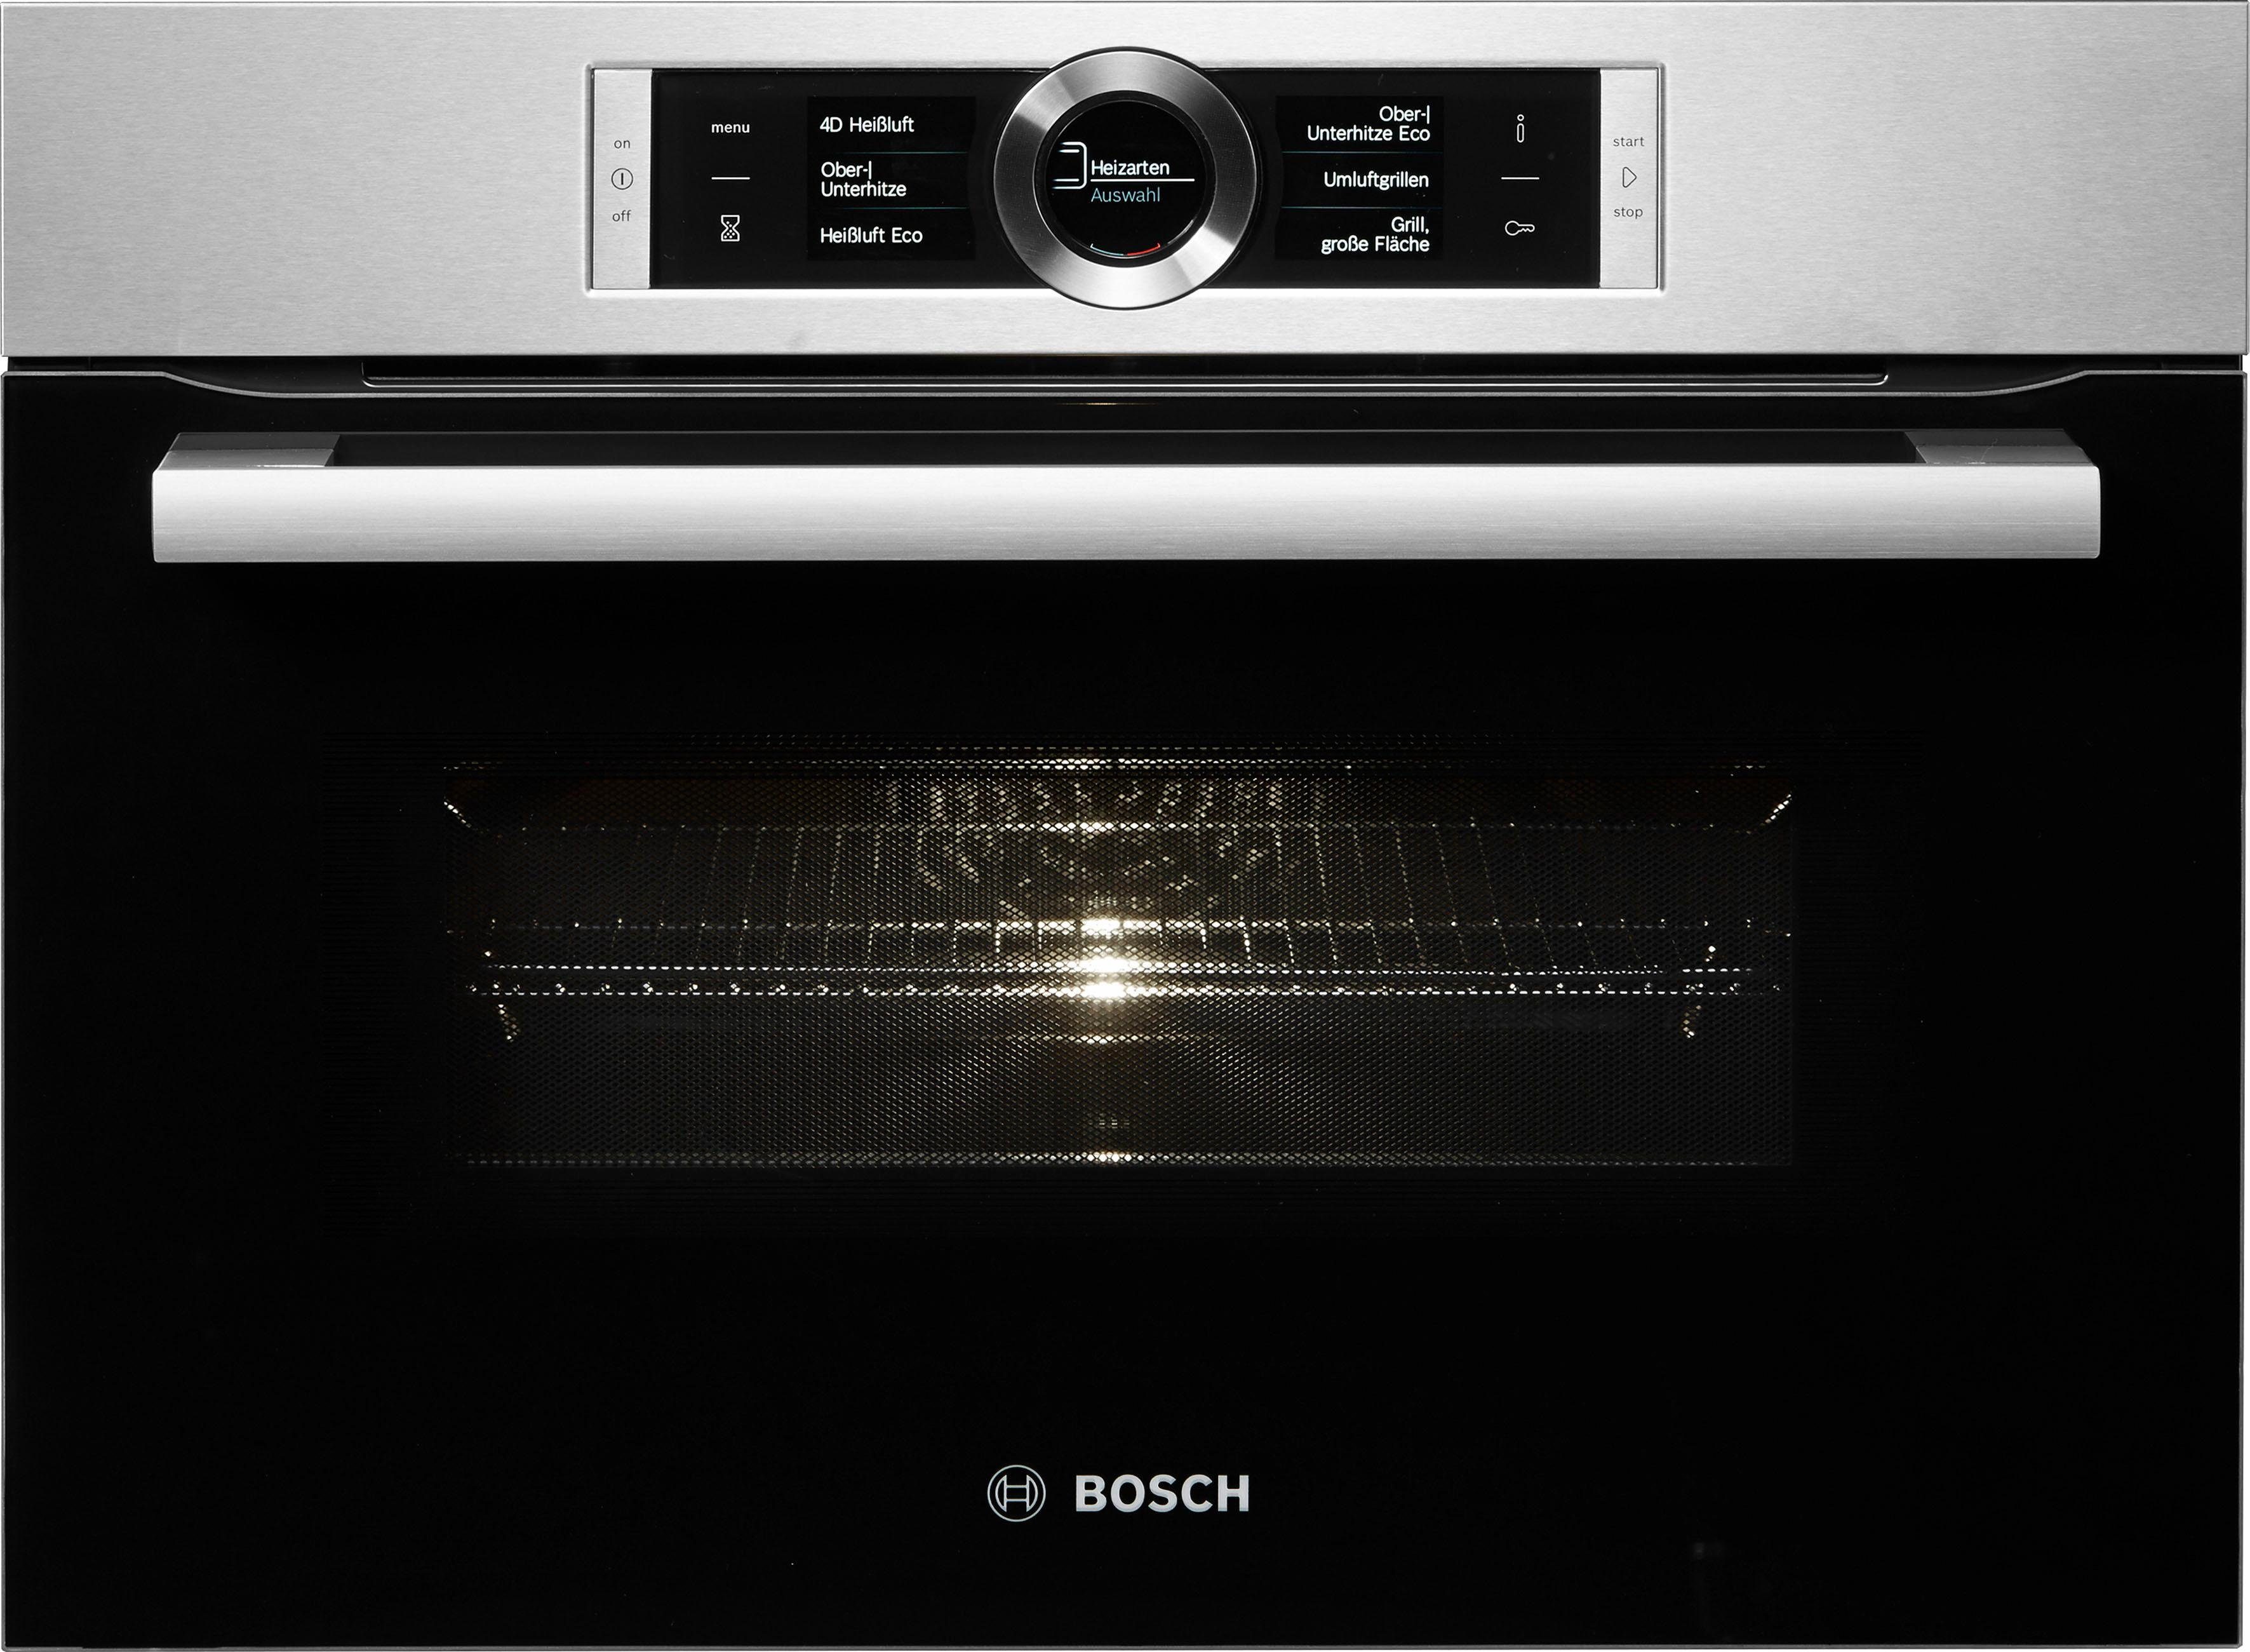 BOSCH Backofen mit Mikrowelle Direct ecoClean CMG636BS1